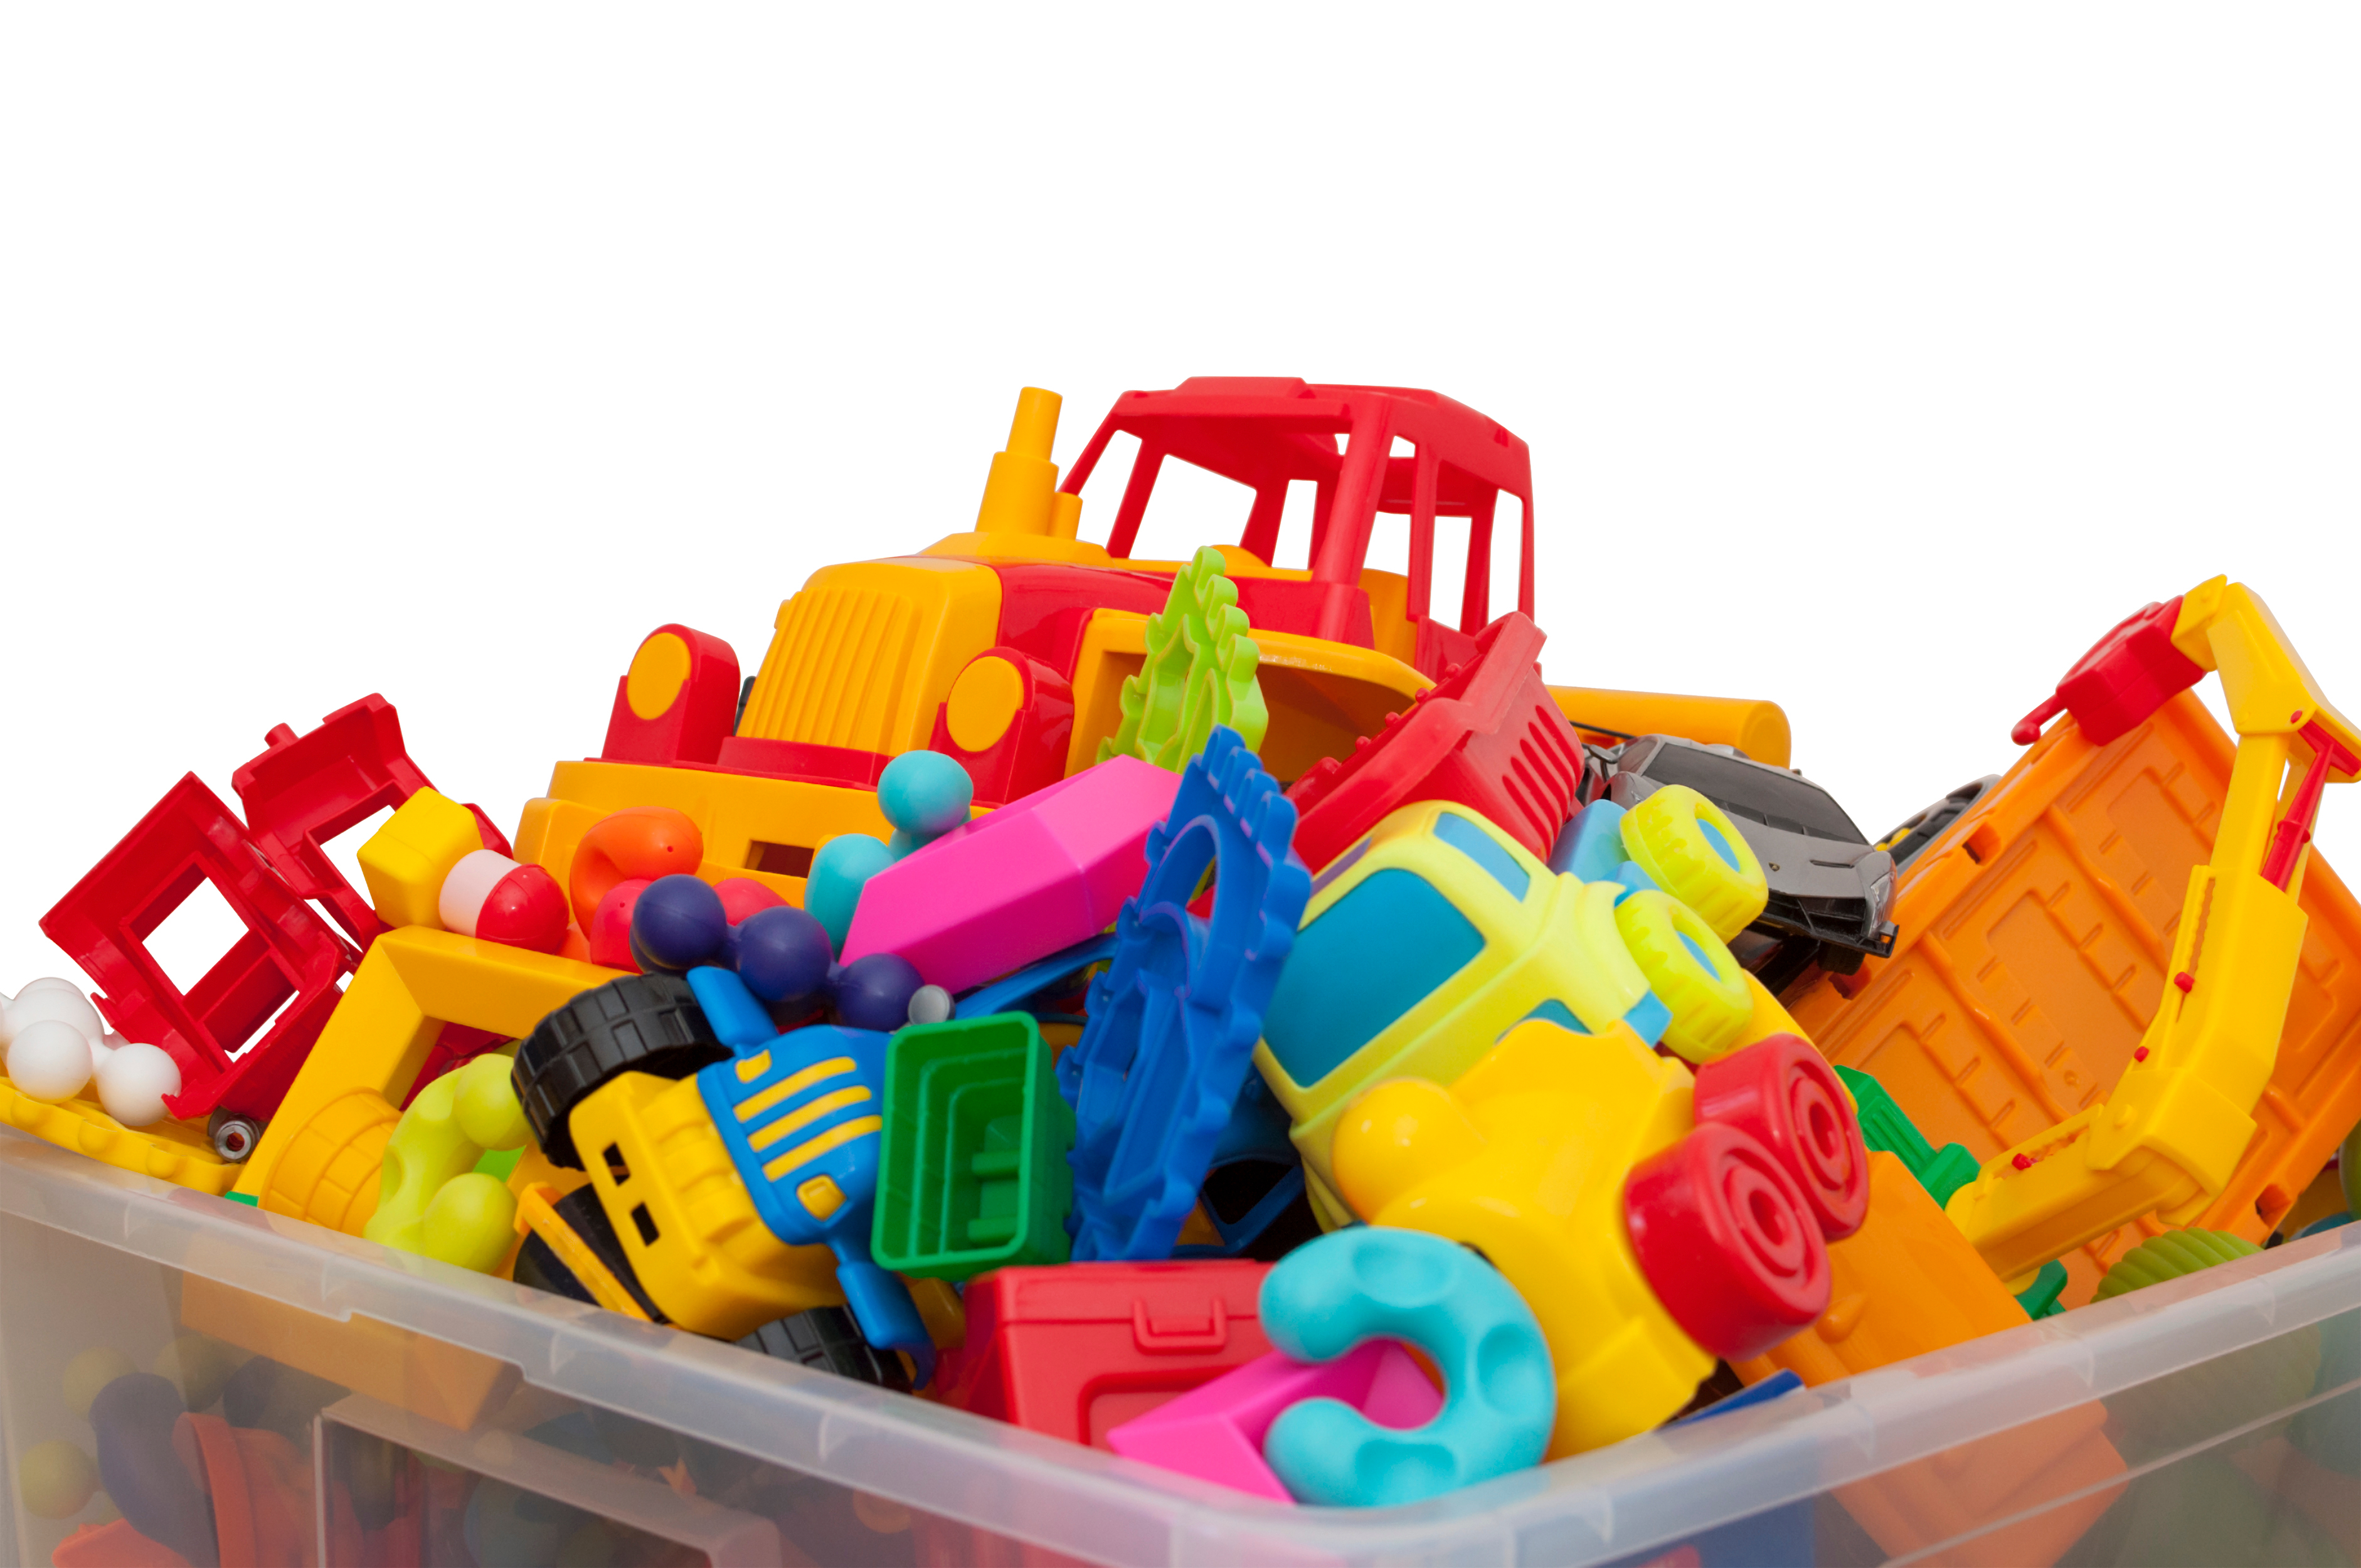 A plastic bin filled with plastic toys | Source: Shutterstock